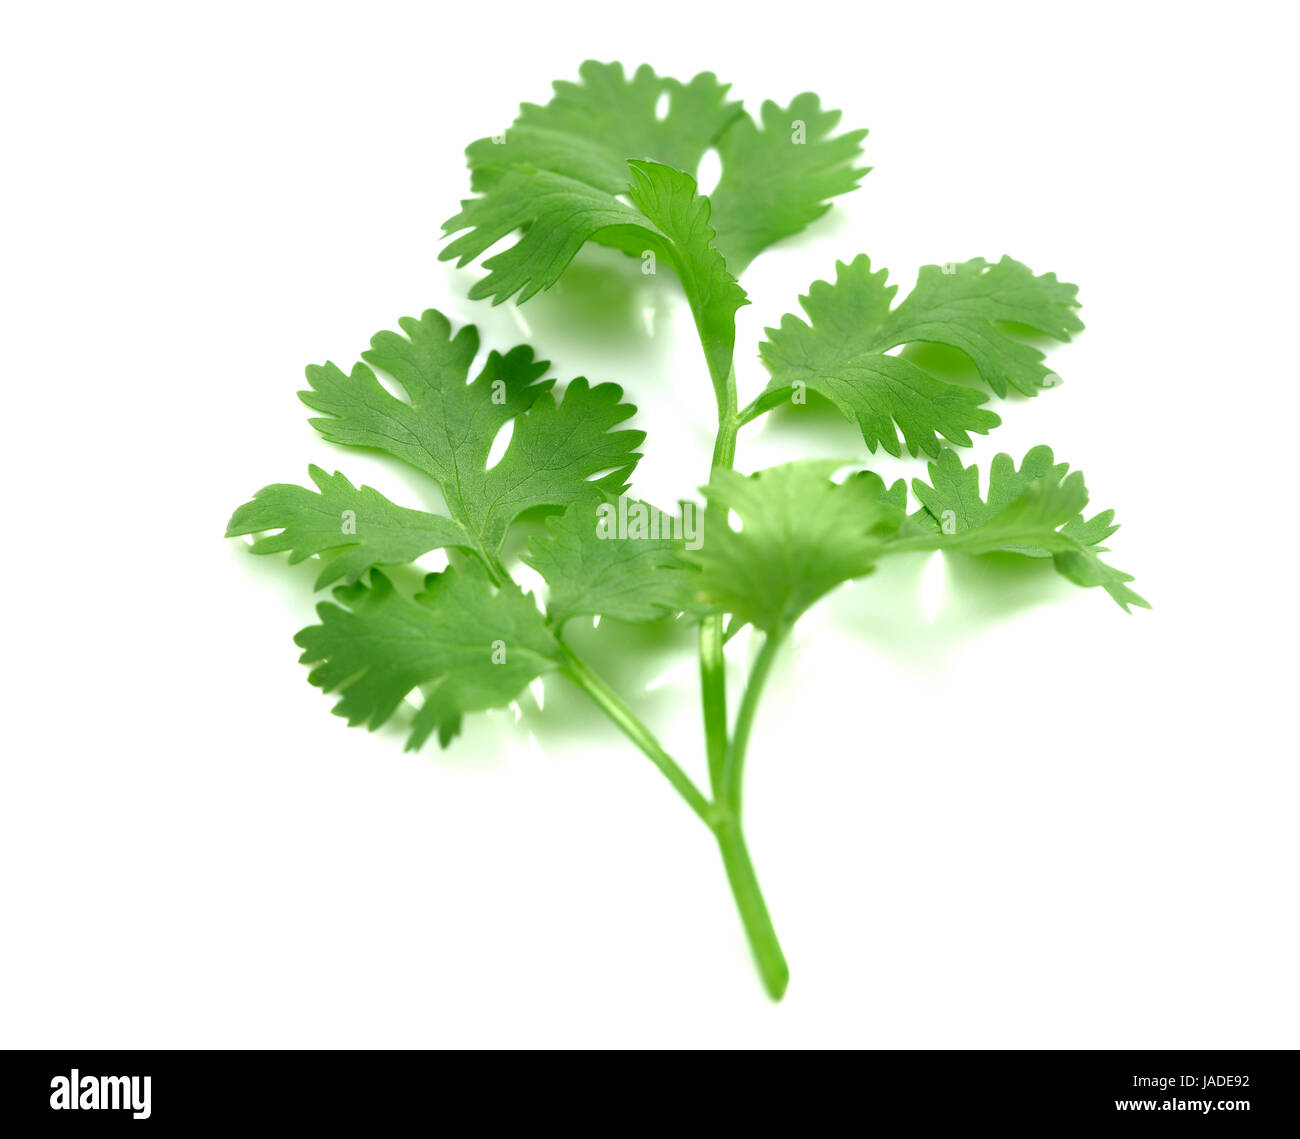 green parsley sprig isolated on white background Stock Photo